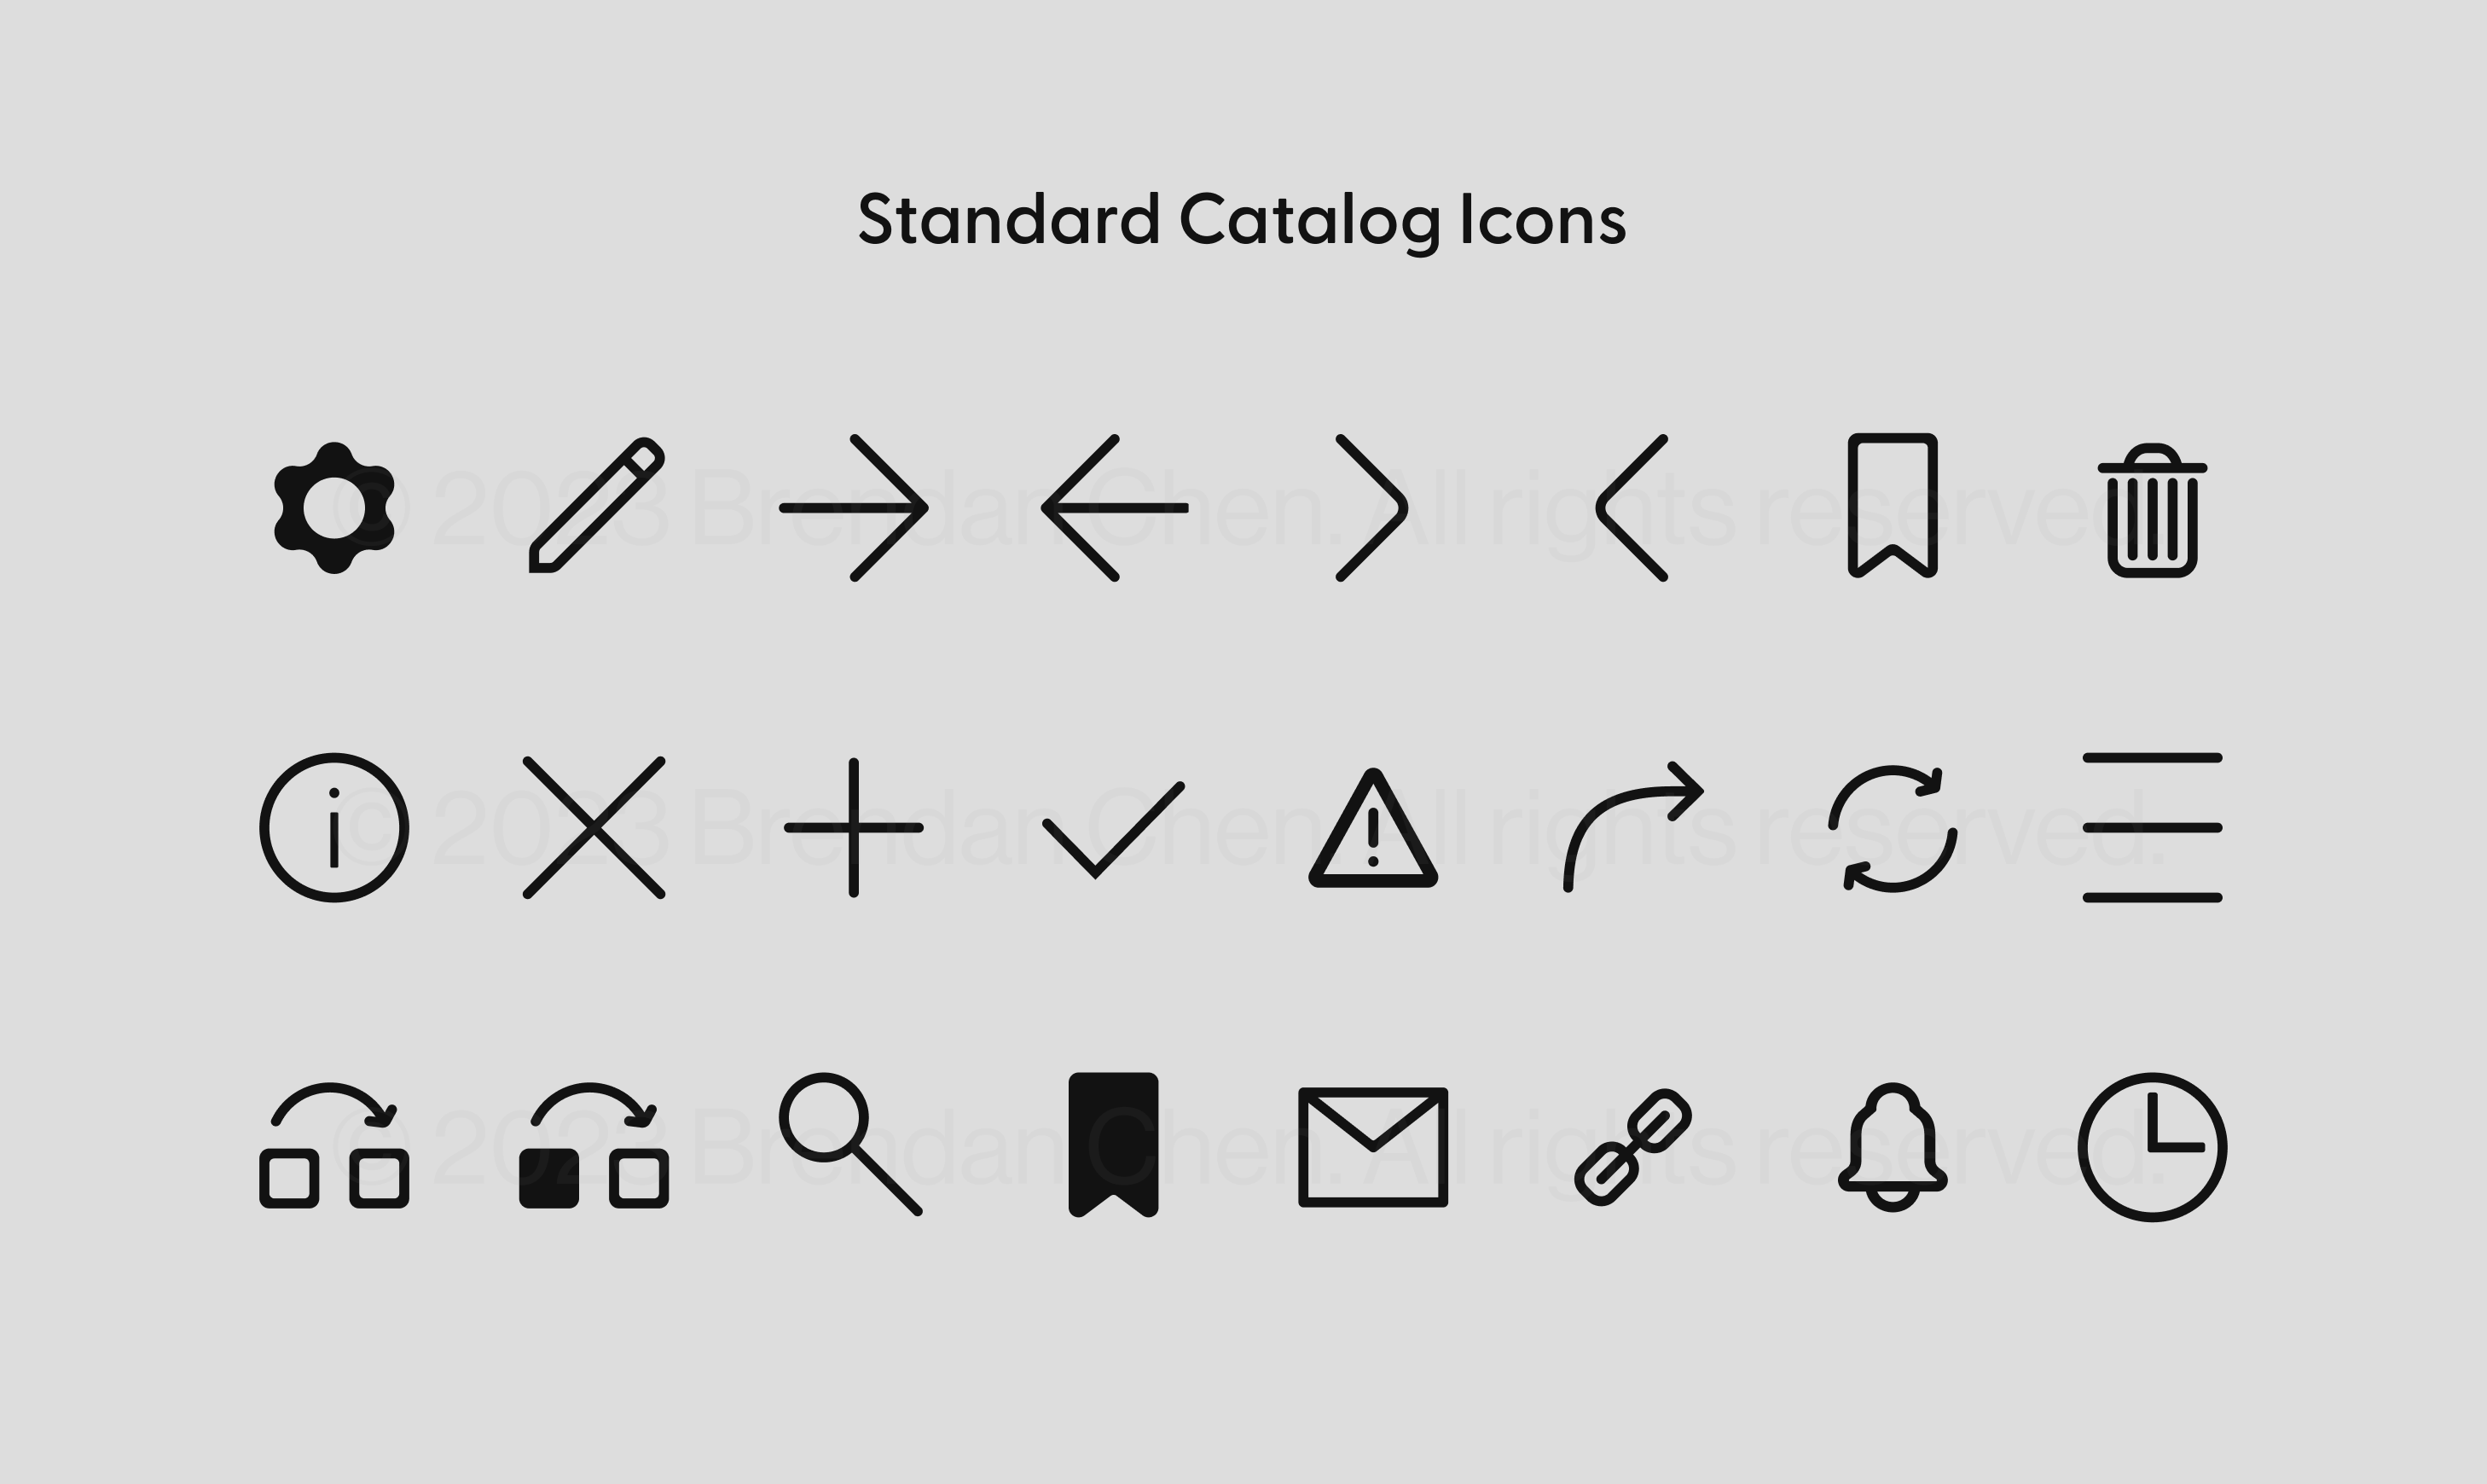 Custom-designed icons for the Standard Catalog project.